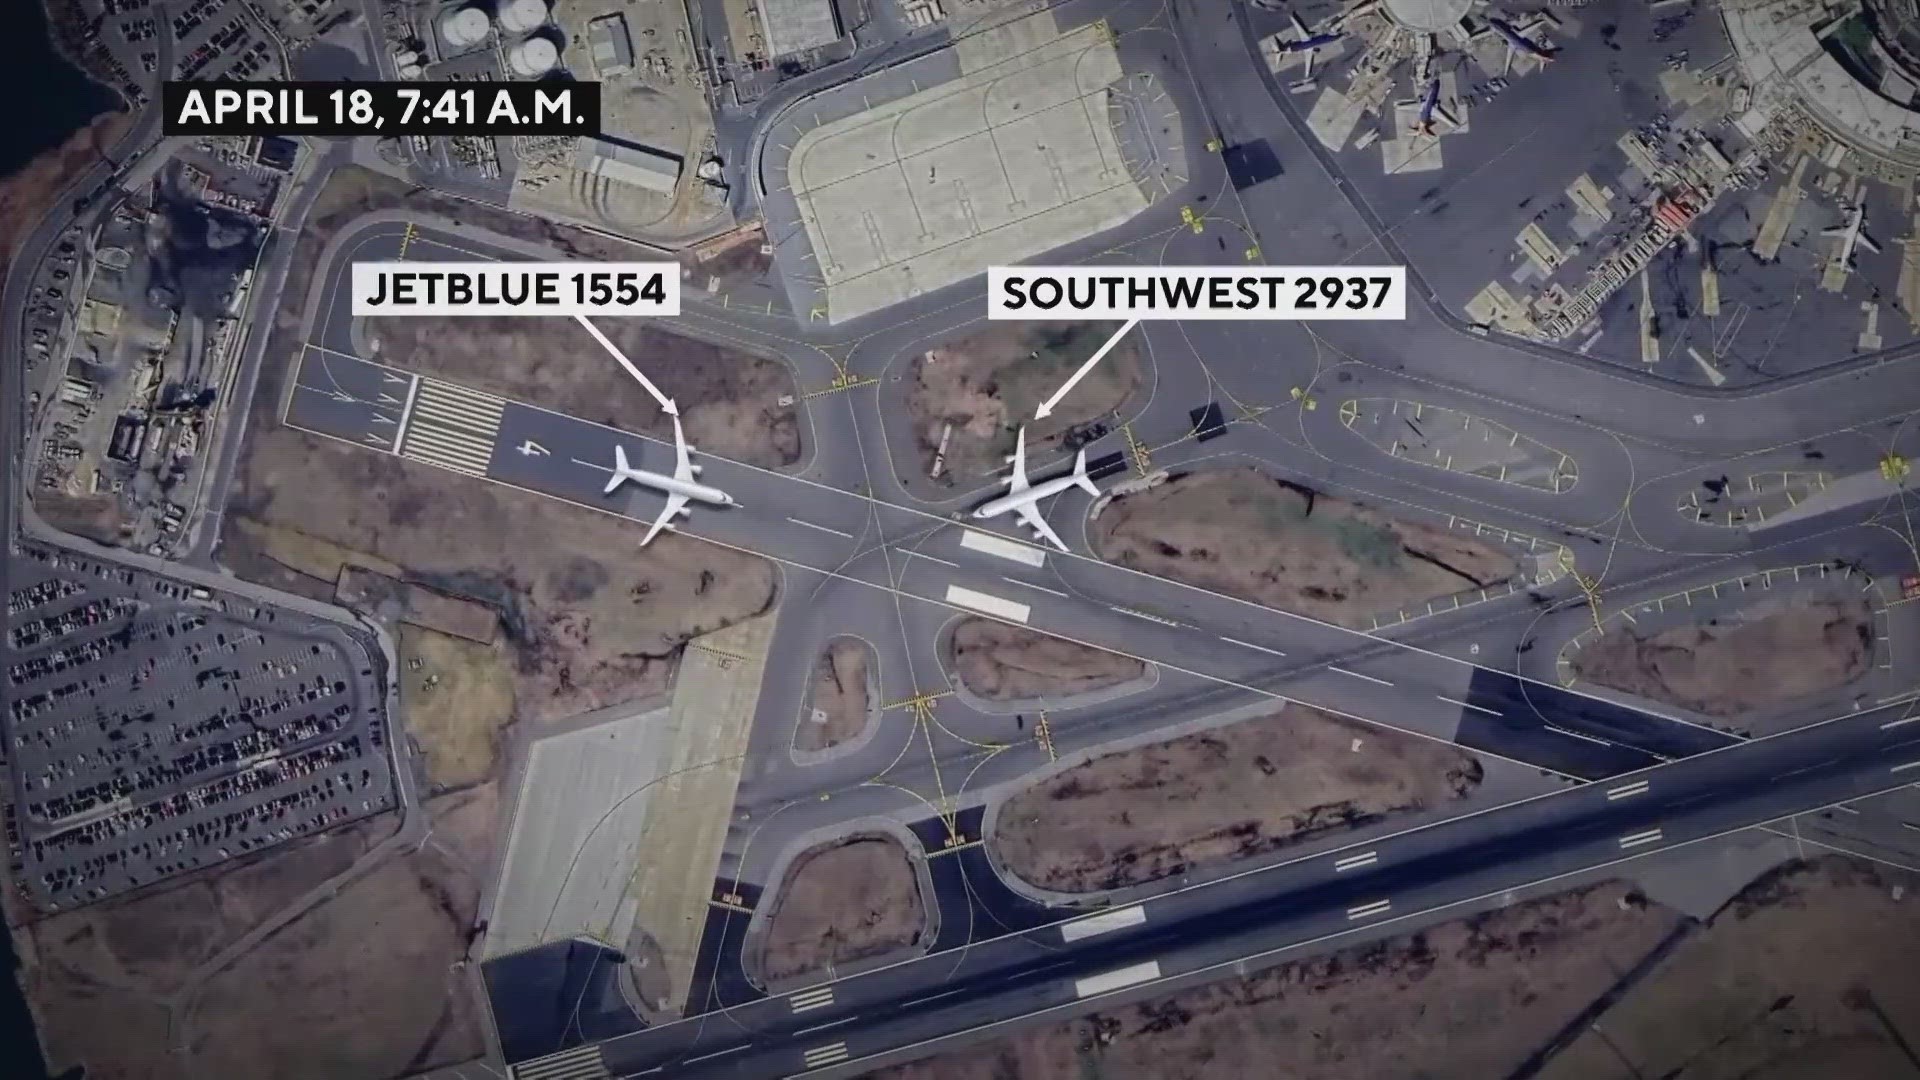 This week the Federal Aviation Administration opened an investigation into the latest "near miss" on Reagan National Airport (DCA)'s runways.